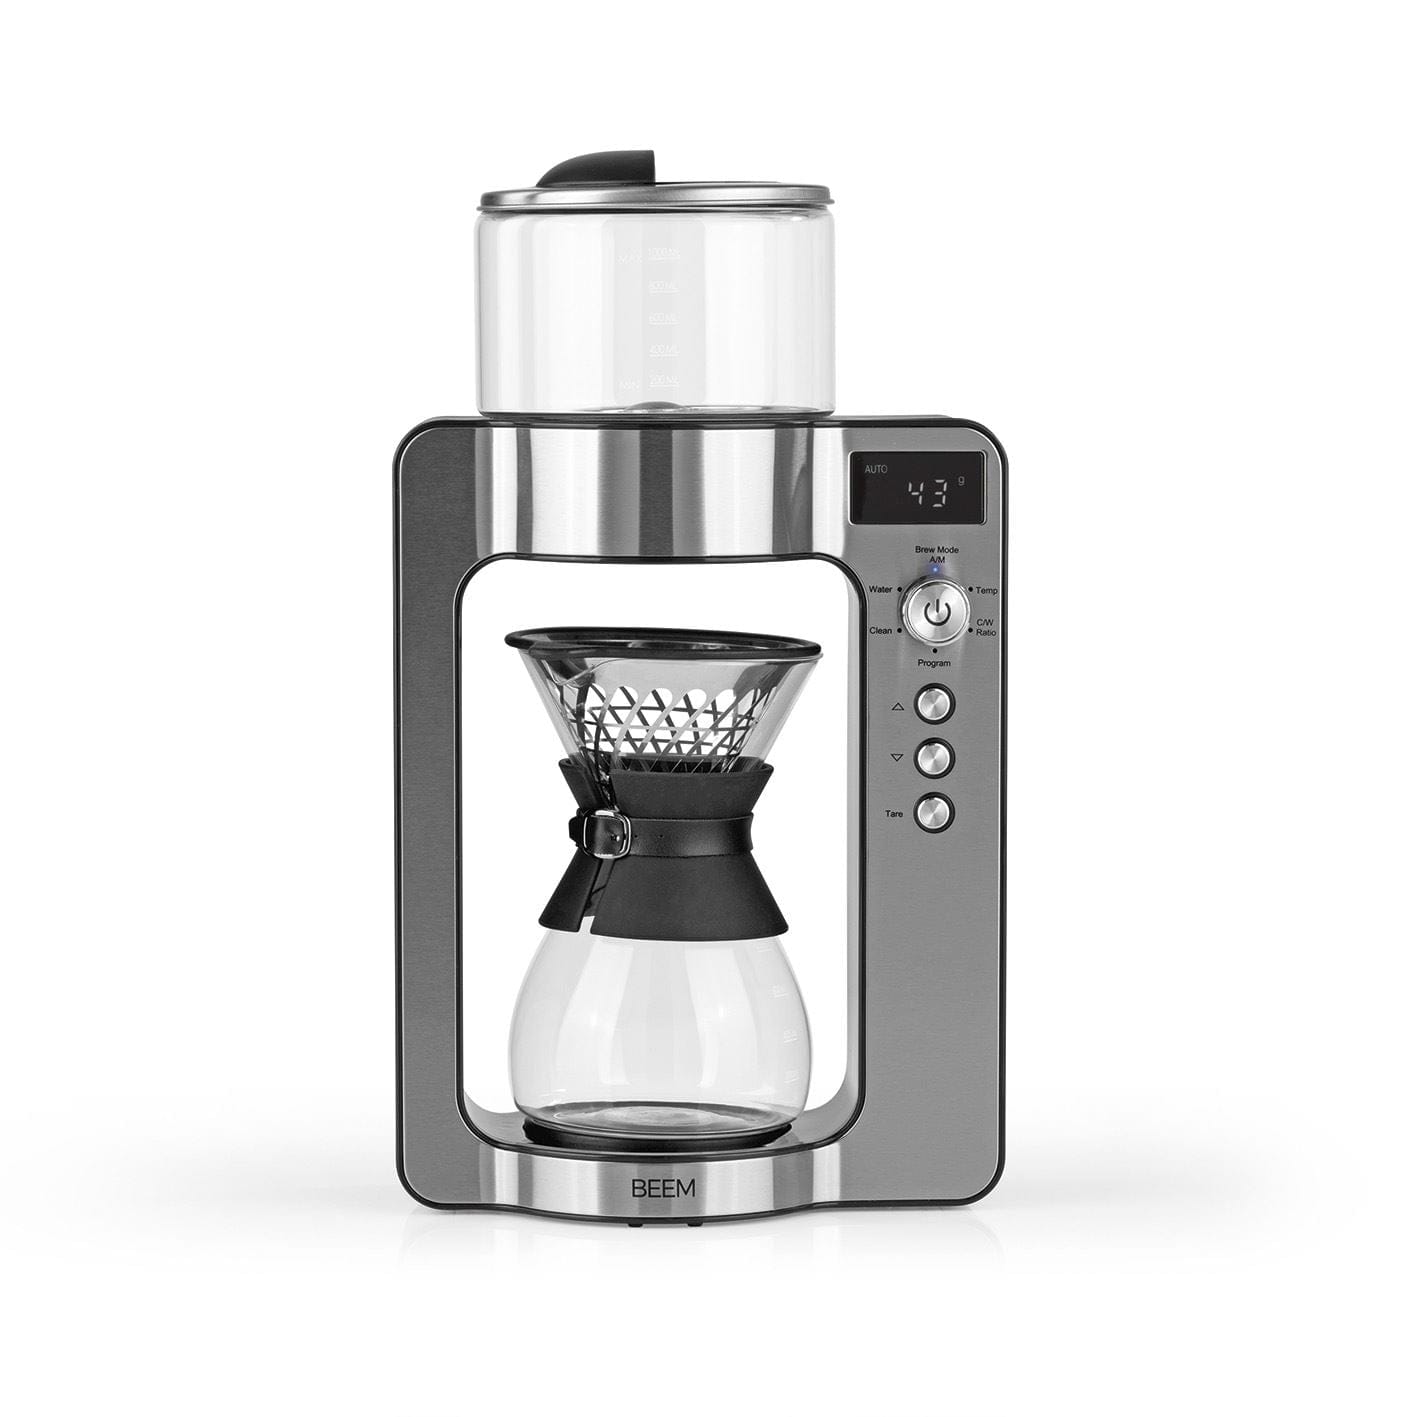 POUR OVER Filter Coffee Machine with Scale - Glass